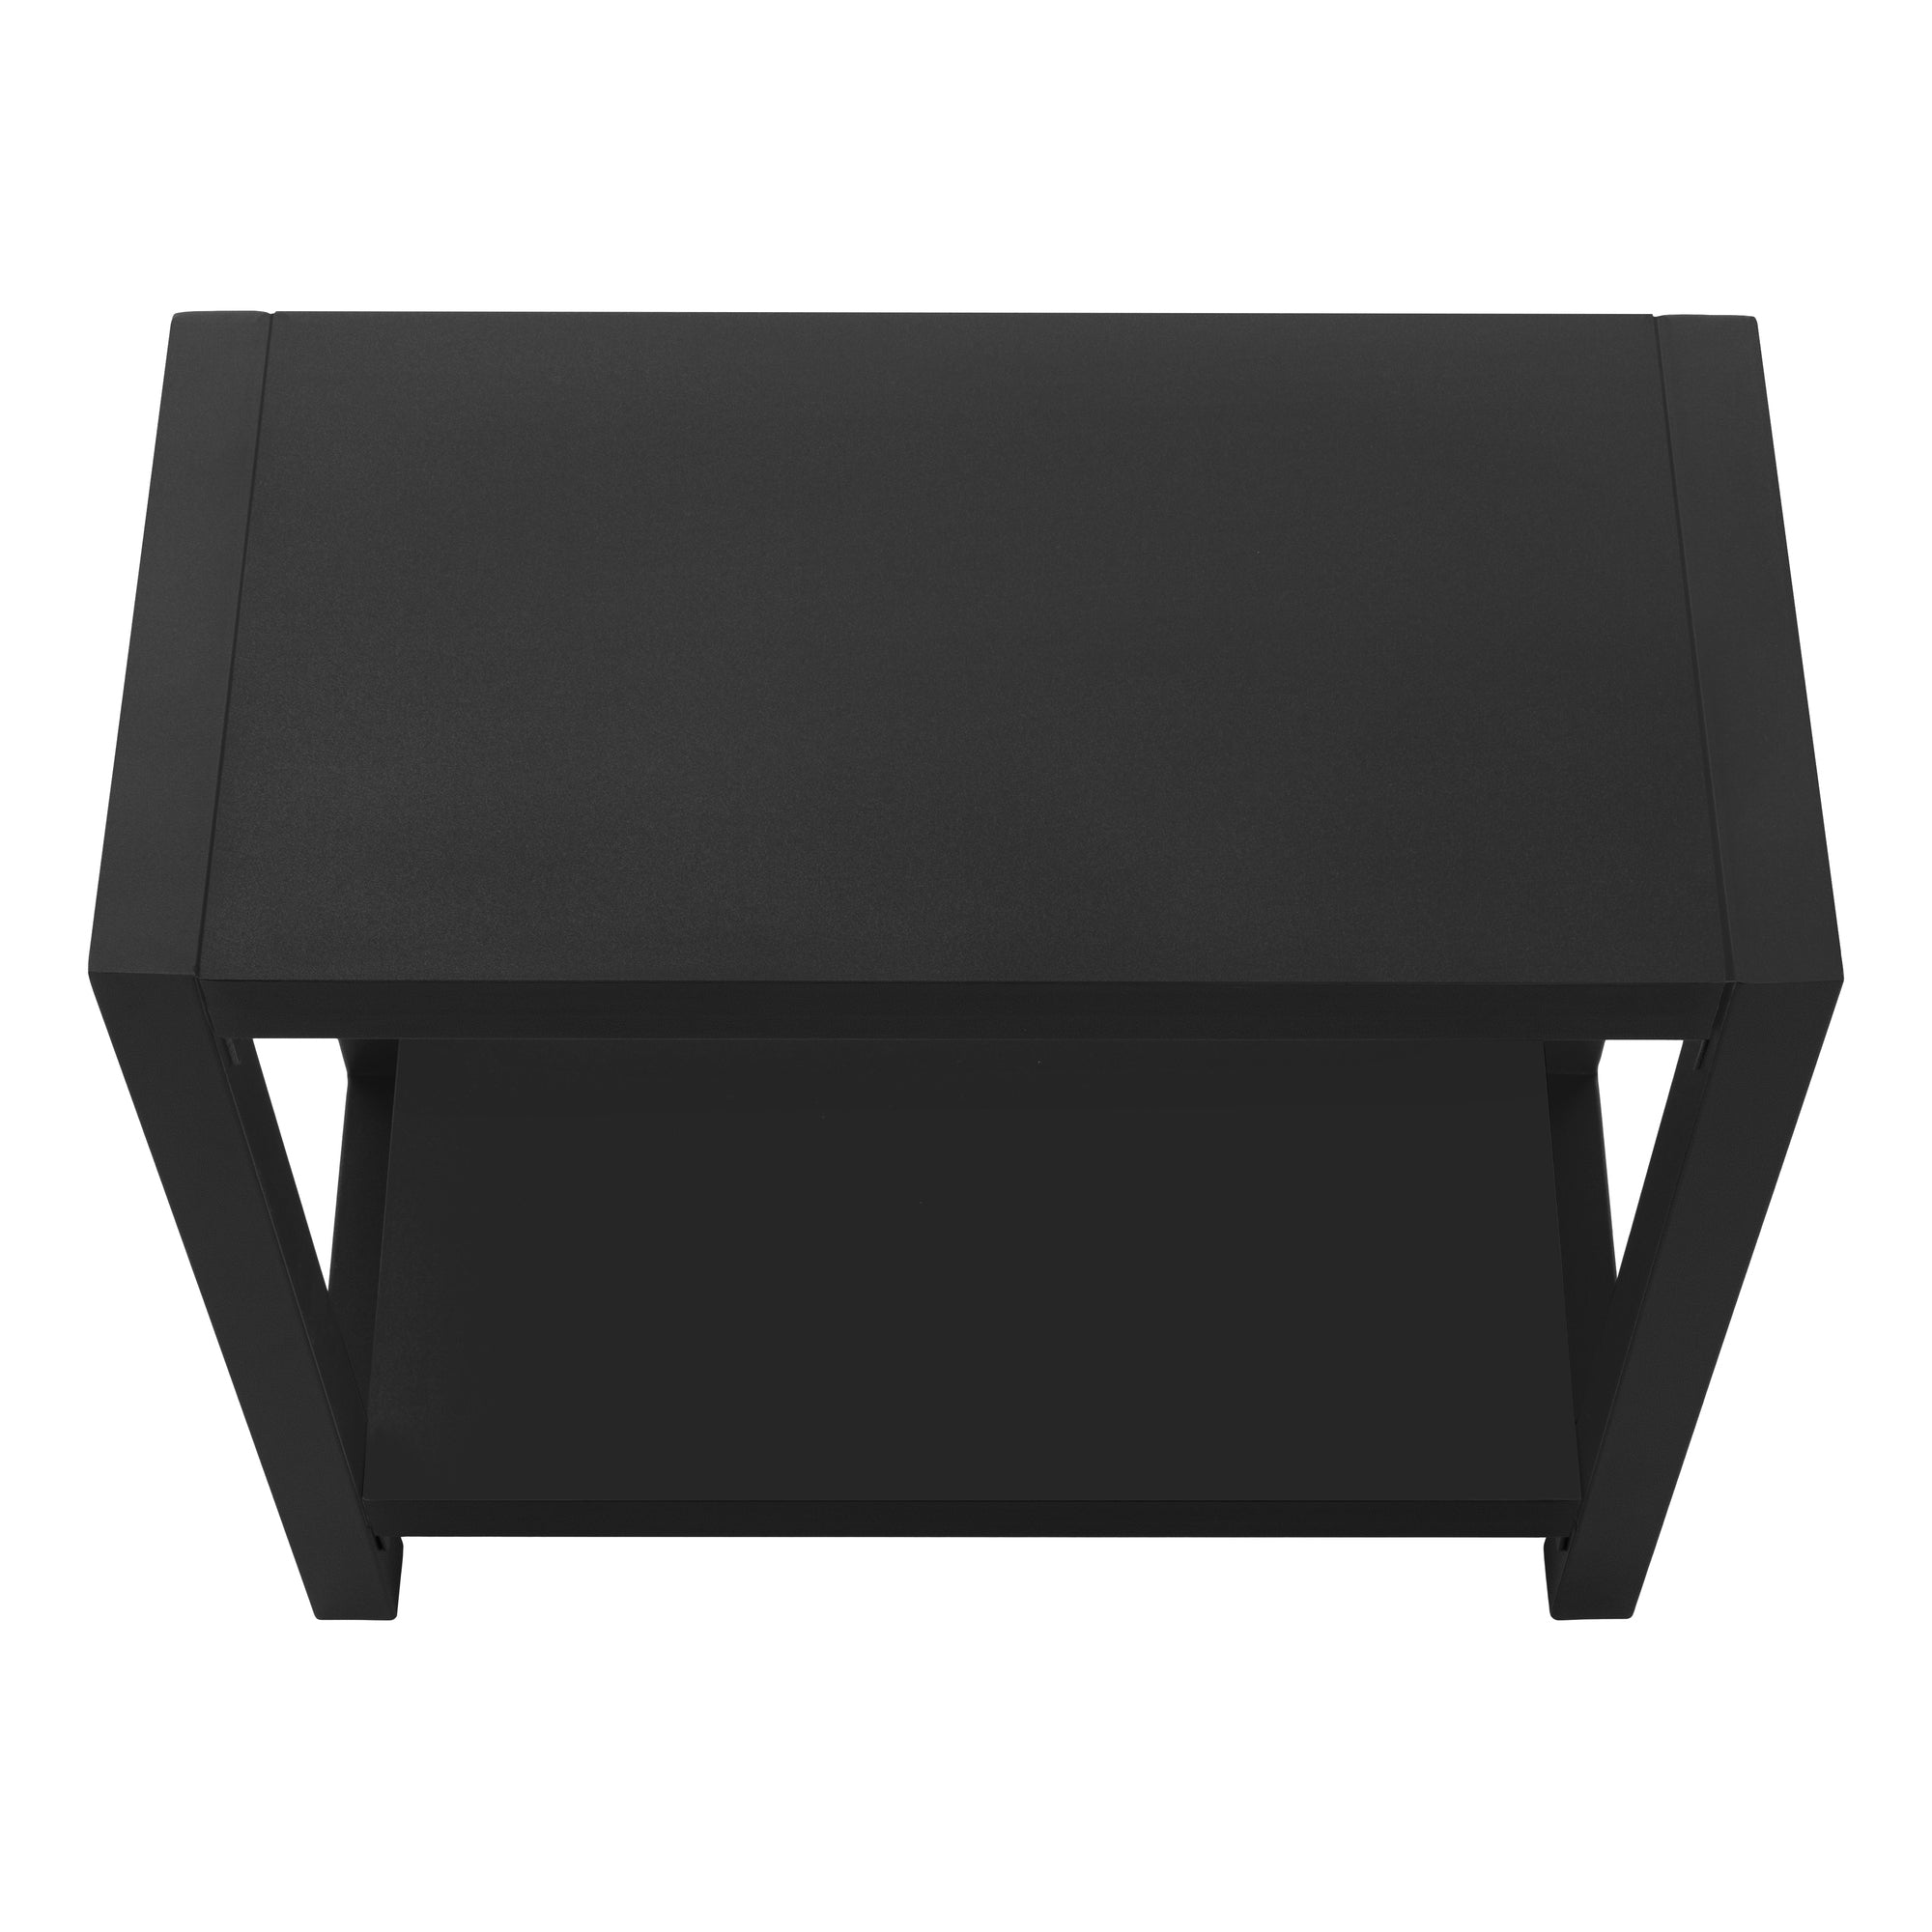 MN-872081    Accent Table, Side, End, Narrow, Small, Living Room, Bedroom, 2 Tier, Metal Legs, Laminate, Black, Contemporary, Modern